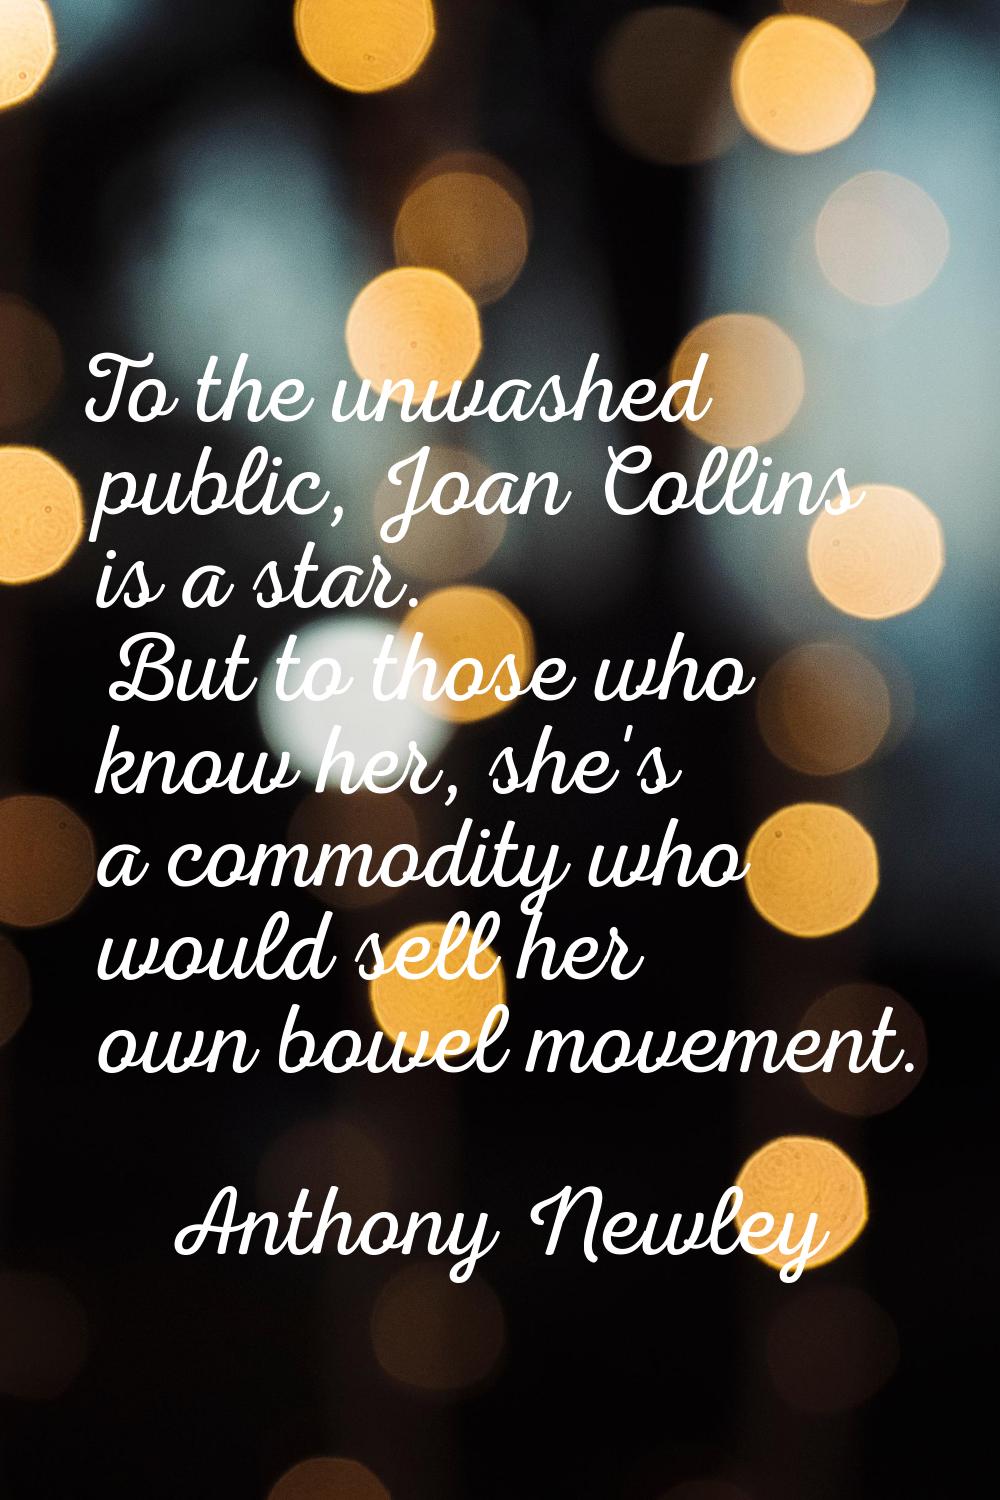 To the unwashed public, Joan Collins is a star. But to those who know her, she's a commodity who wo